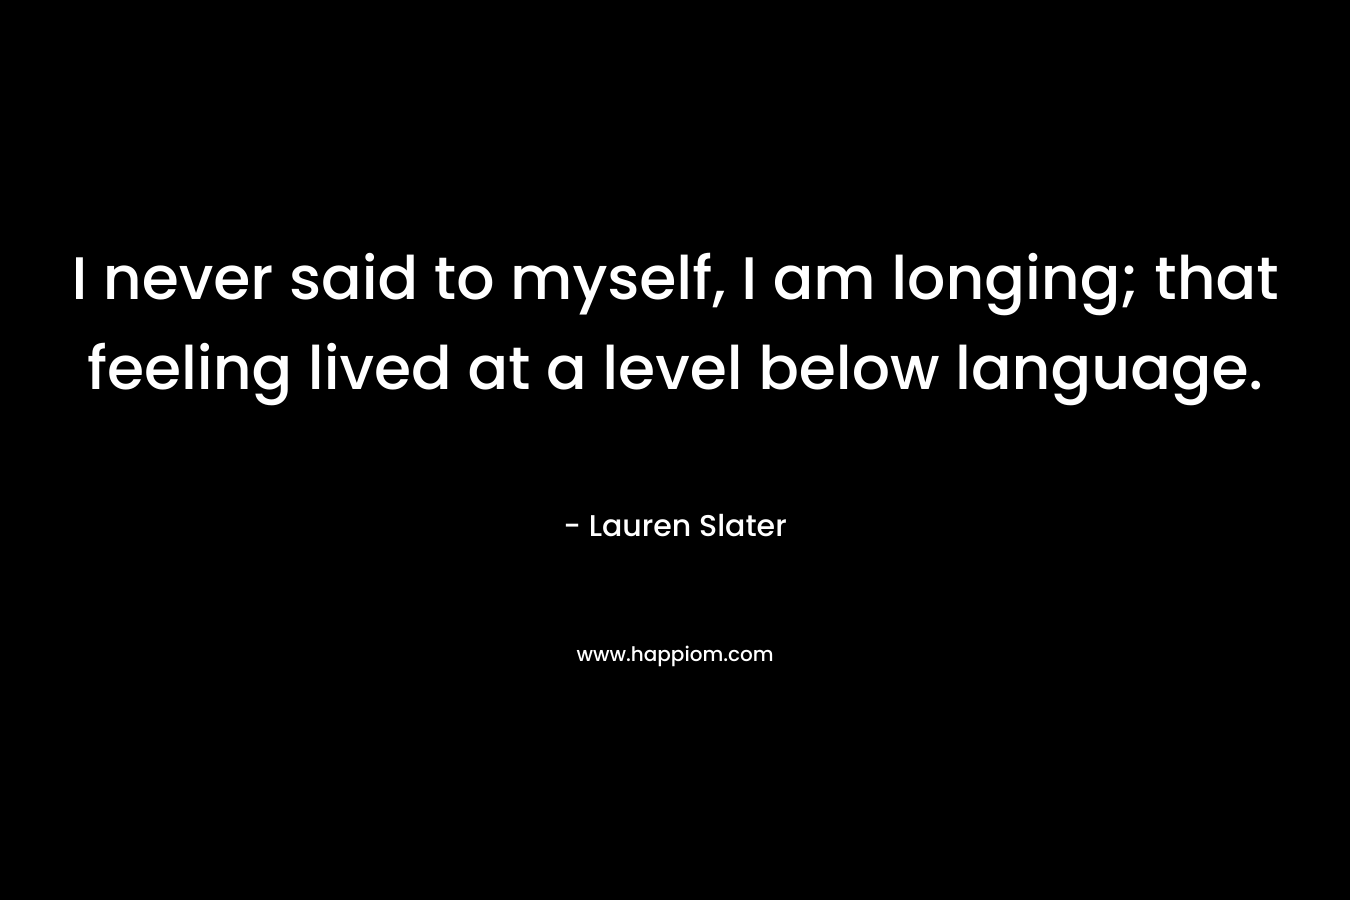 I never said to myself, I am longing; that feeling lived at a level below language.